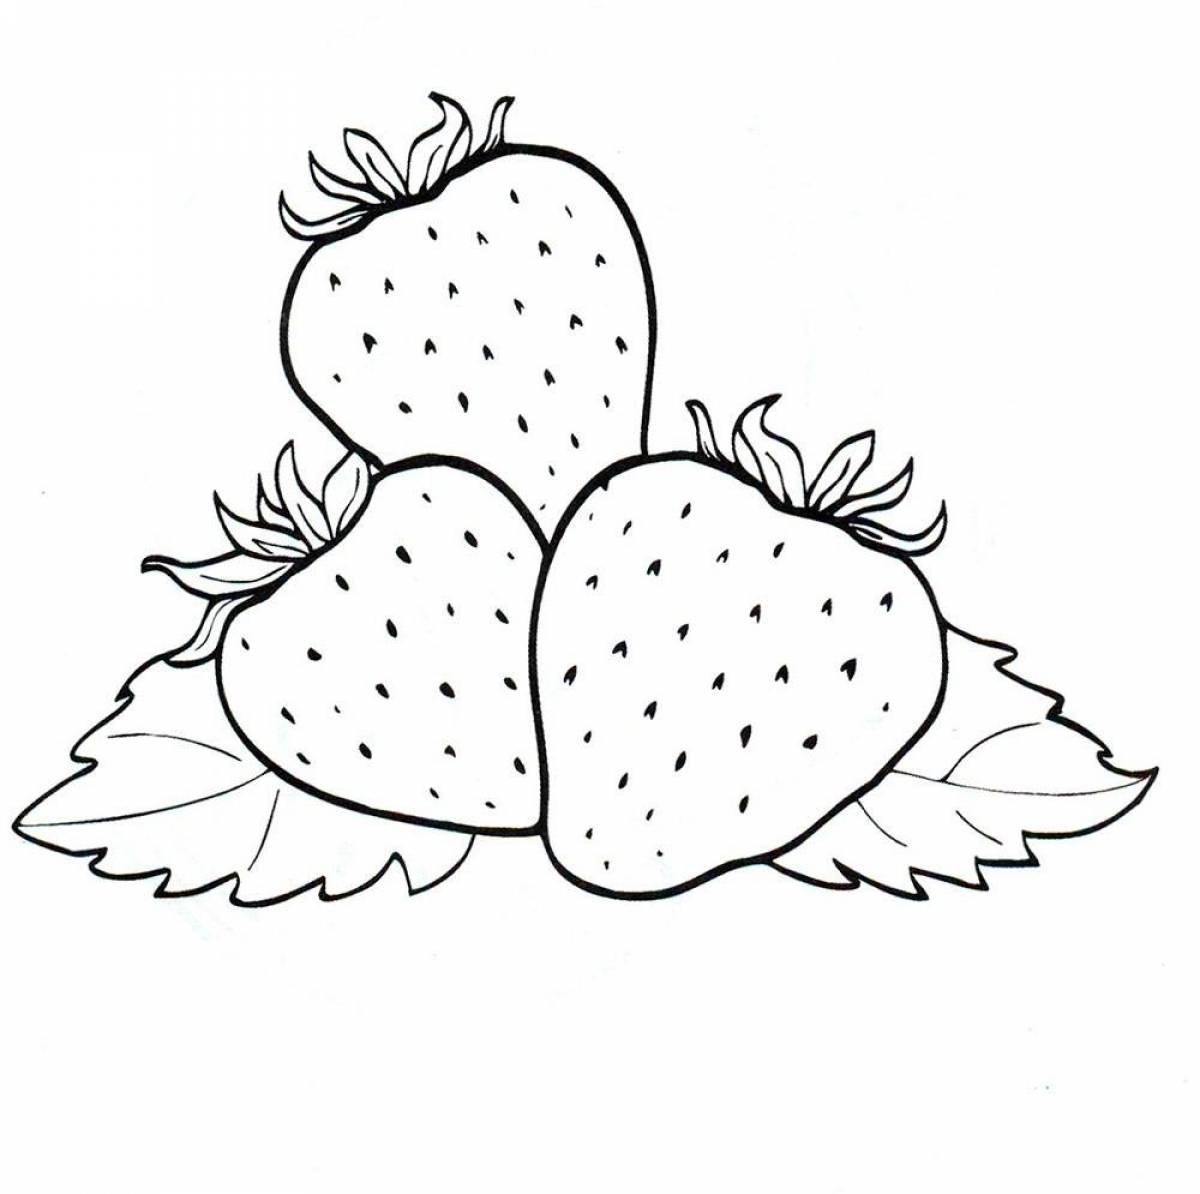 Joyful strawberry coloring book for kids